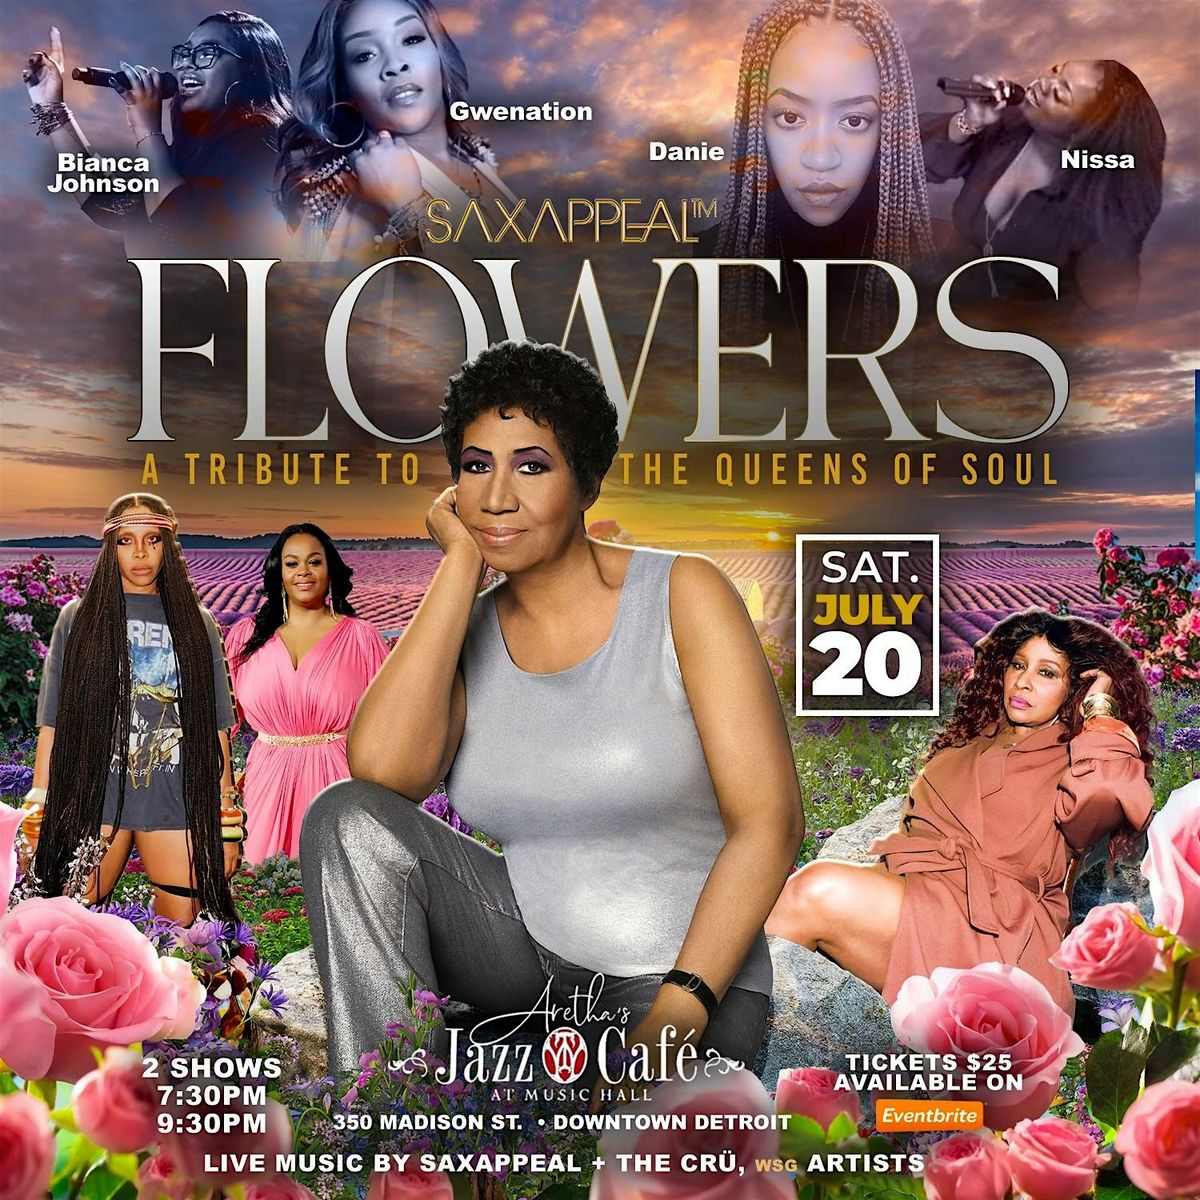 FLOWERS: a Tribute to The Queens of Soul